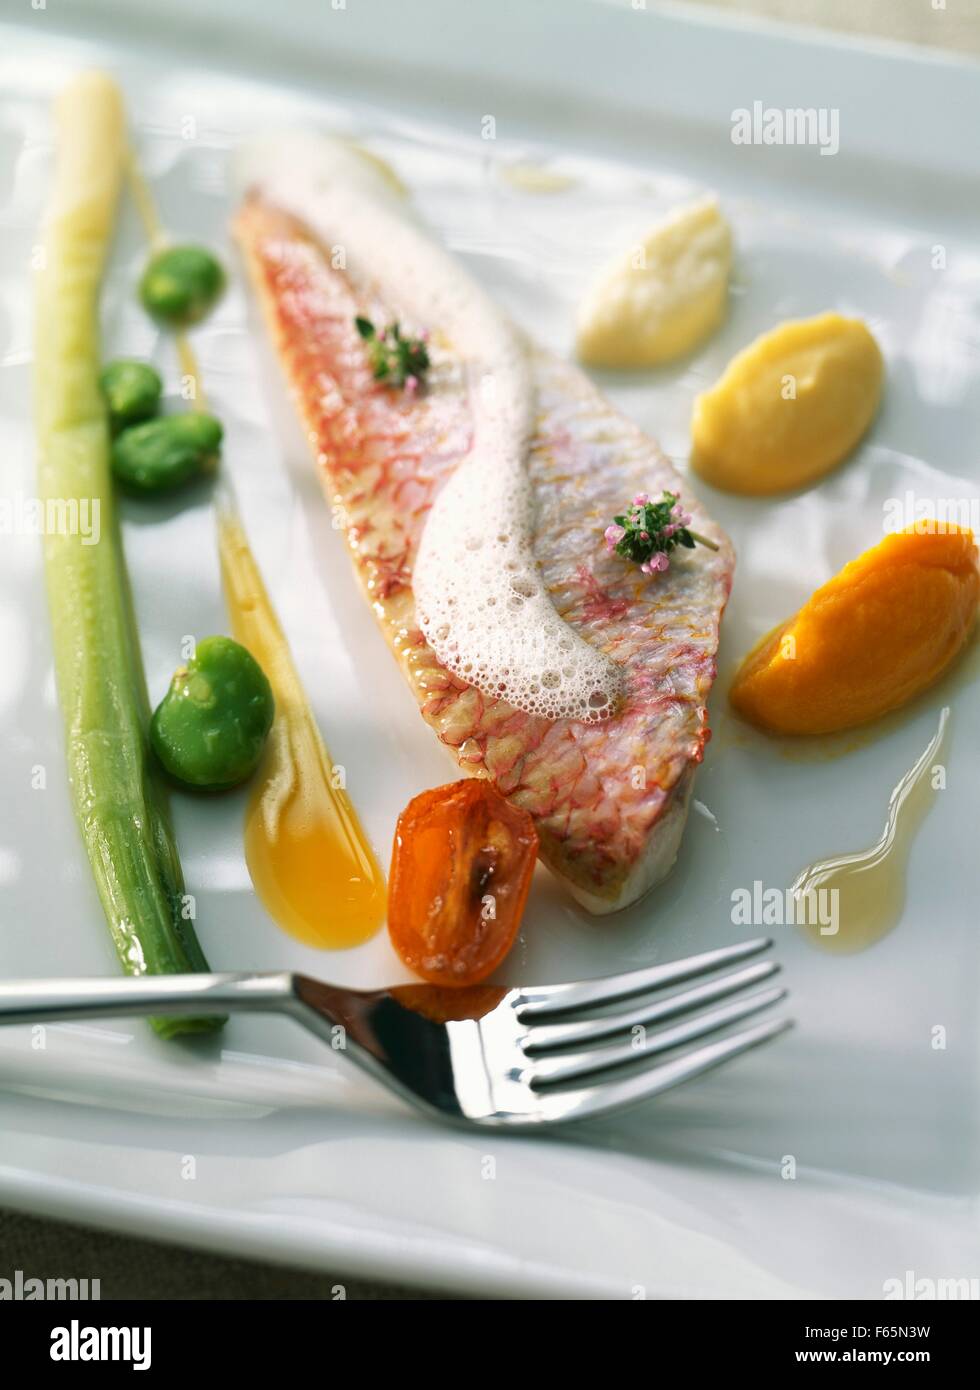 Red mullet fillet with carrot and orange mousse Stock Photo